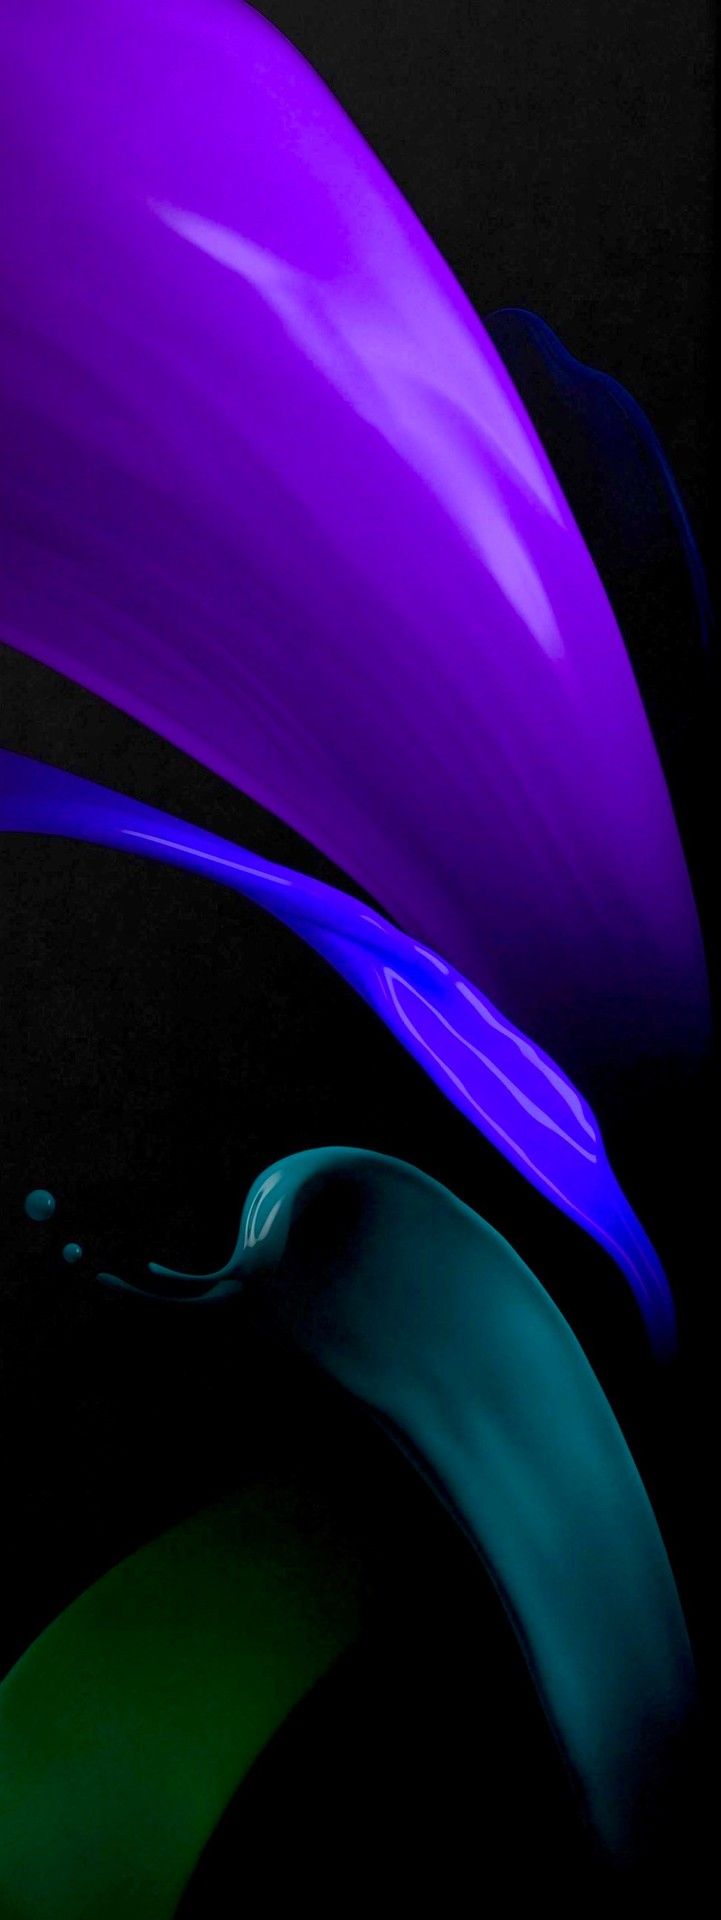 Here are the Samsung Galaxy Z Fold 2 wallpaper